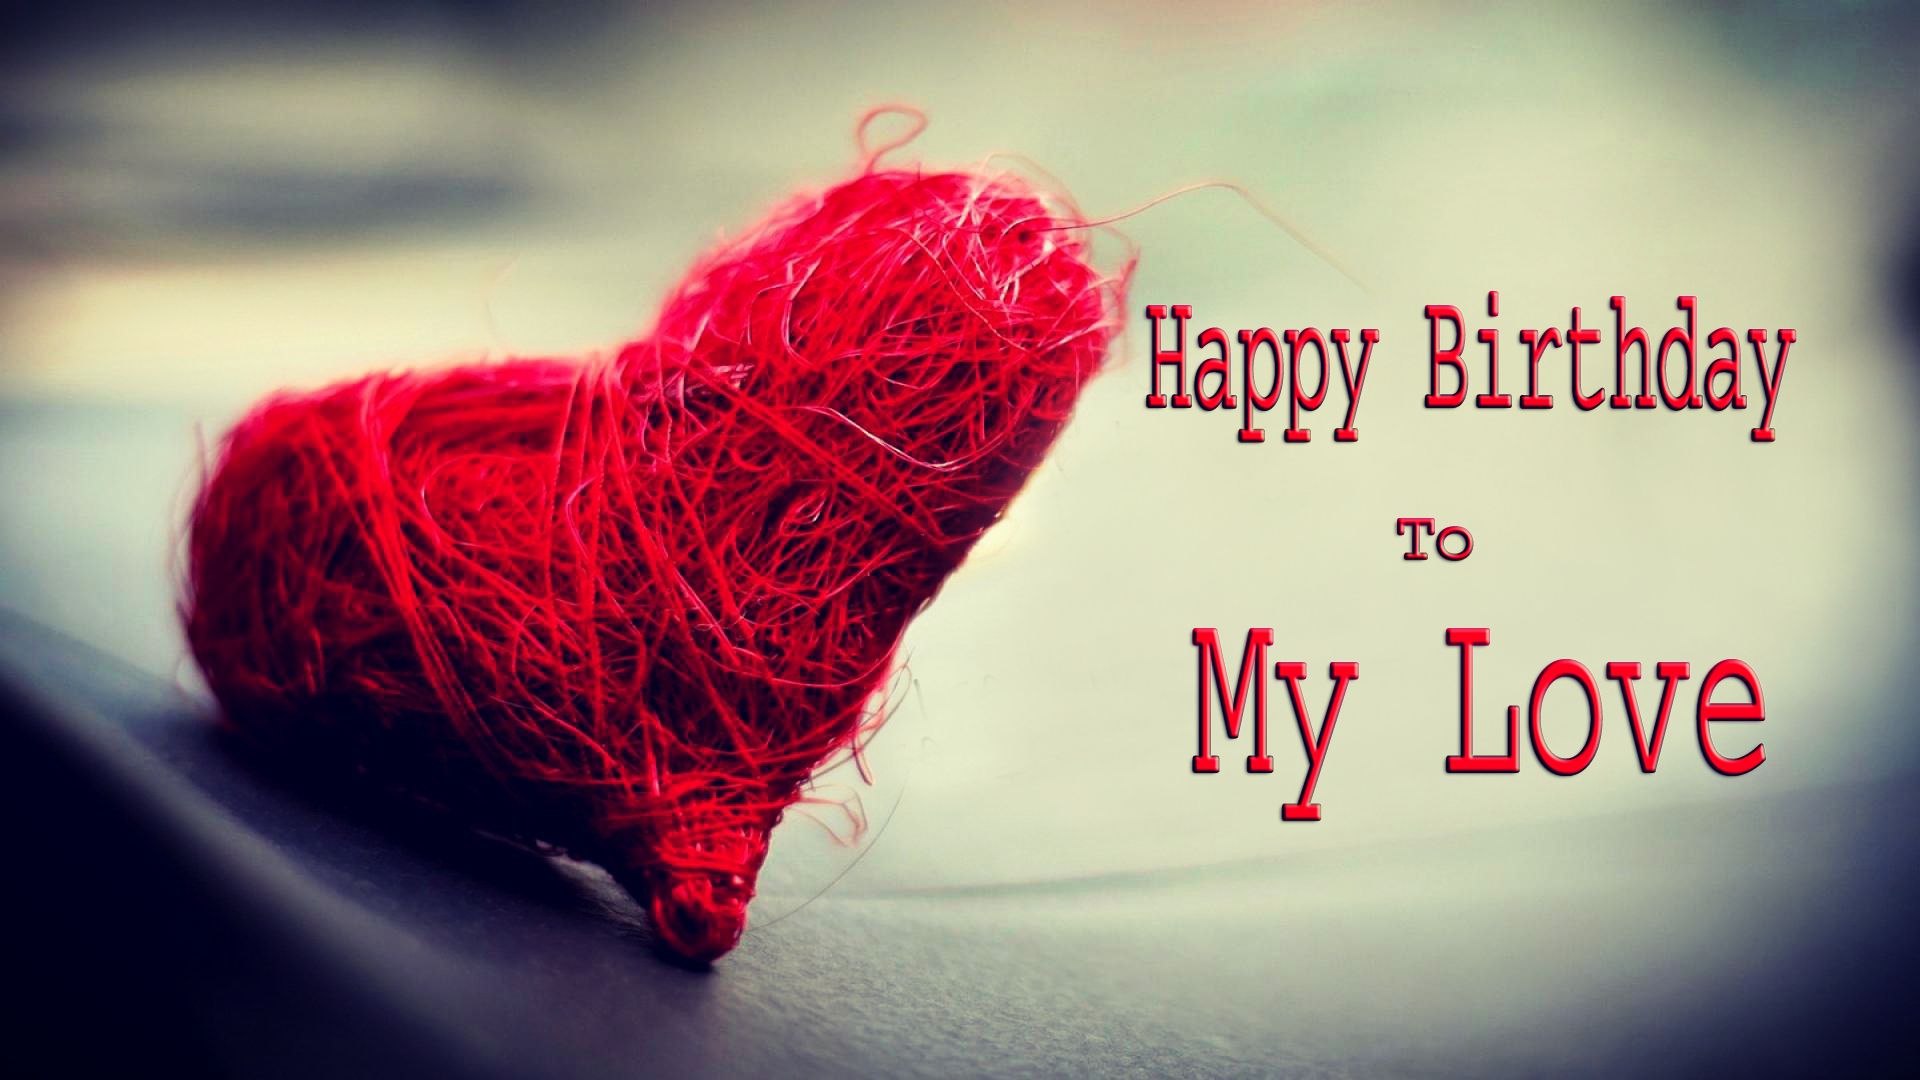 BirtHDay My Love One HD Wallpaper Pictures Background